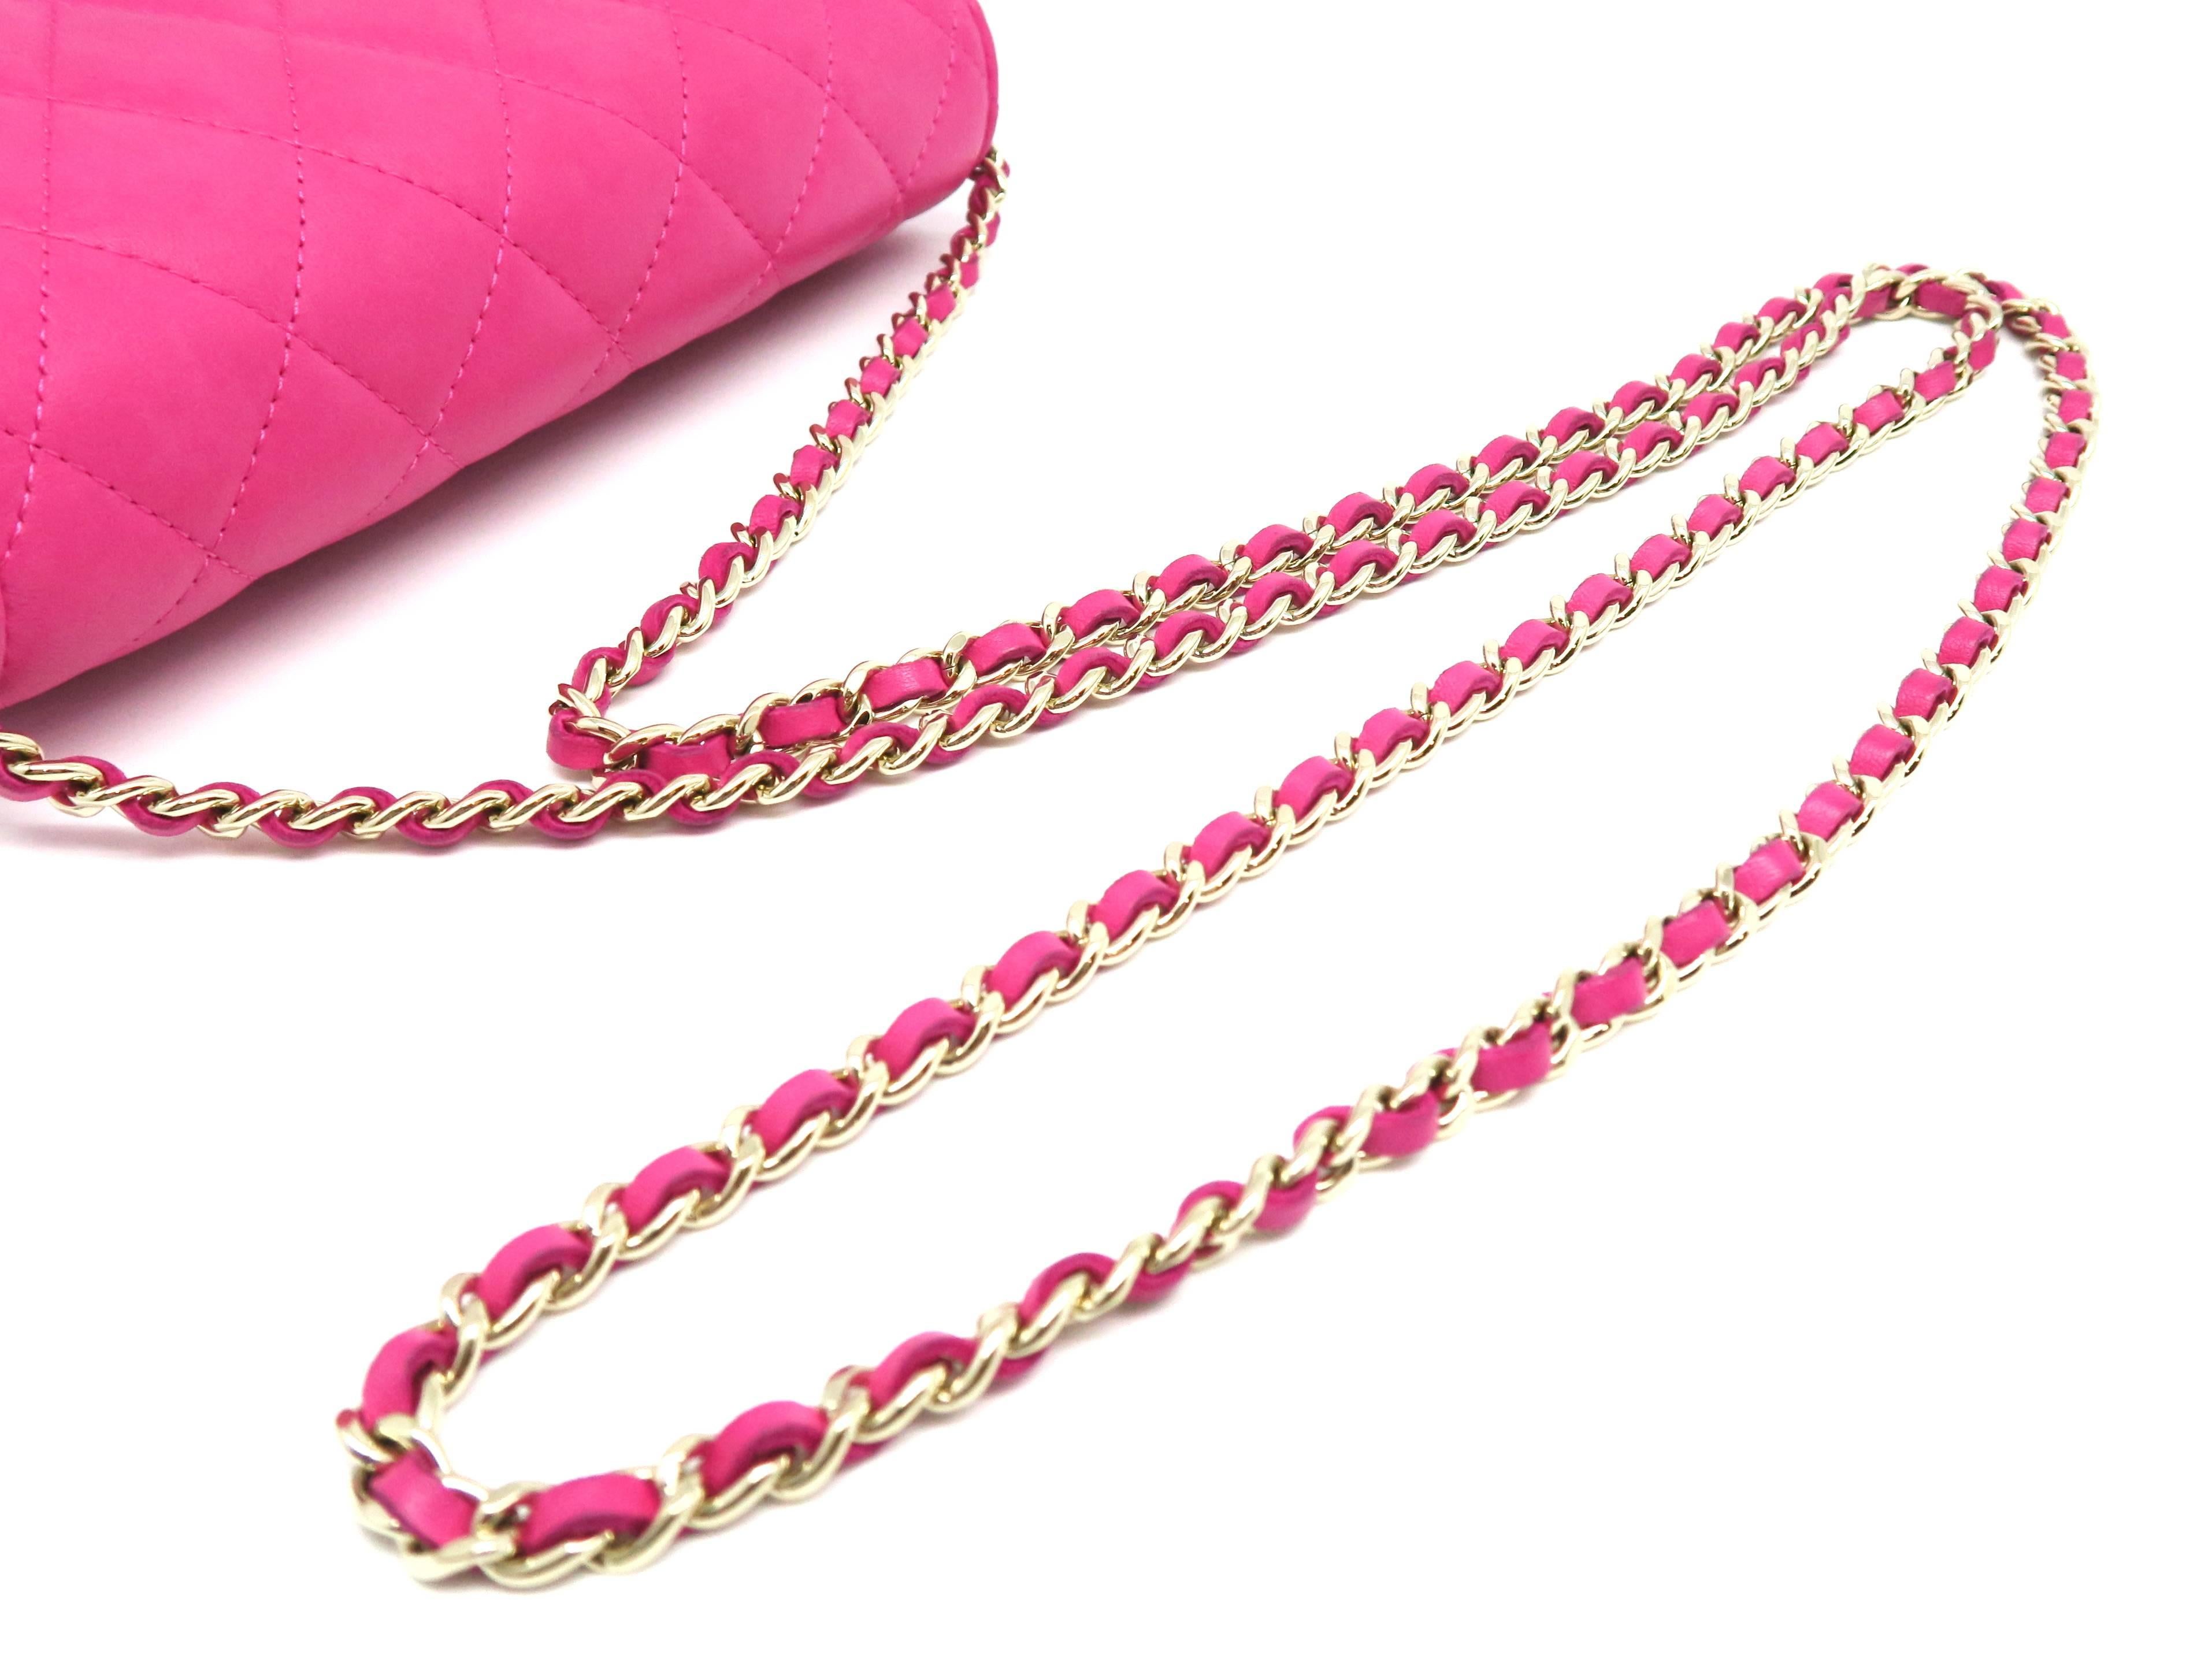 Chanel Wallet On Chain Pink Quilted Lambskin Leather Chain Shoulder Bag 3